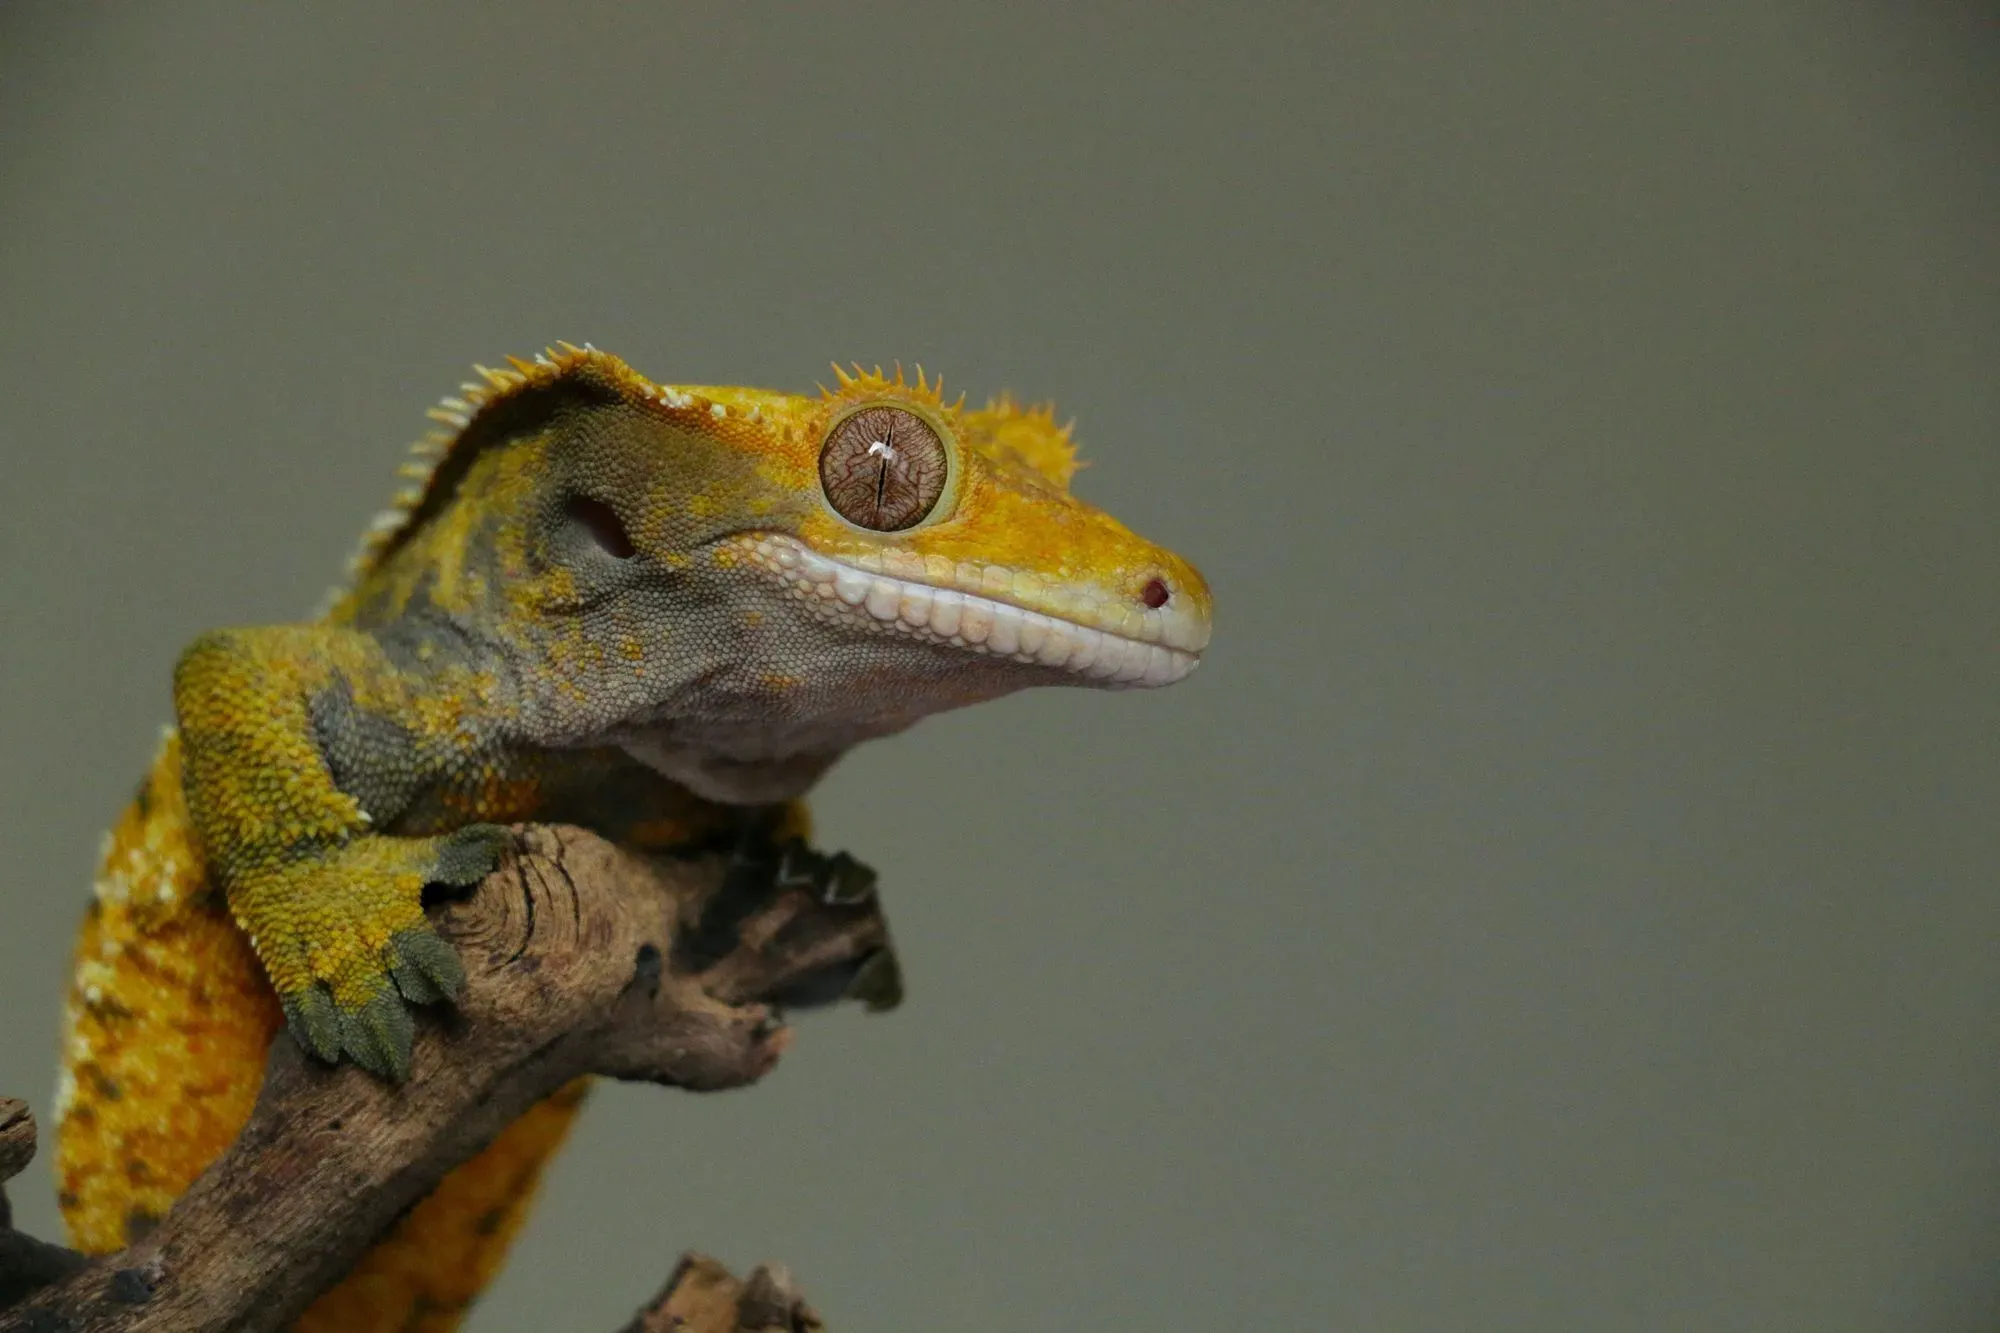 Have you ever wondered what do crested geckos eat or where they live?